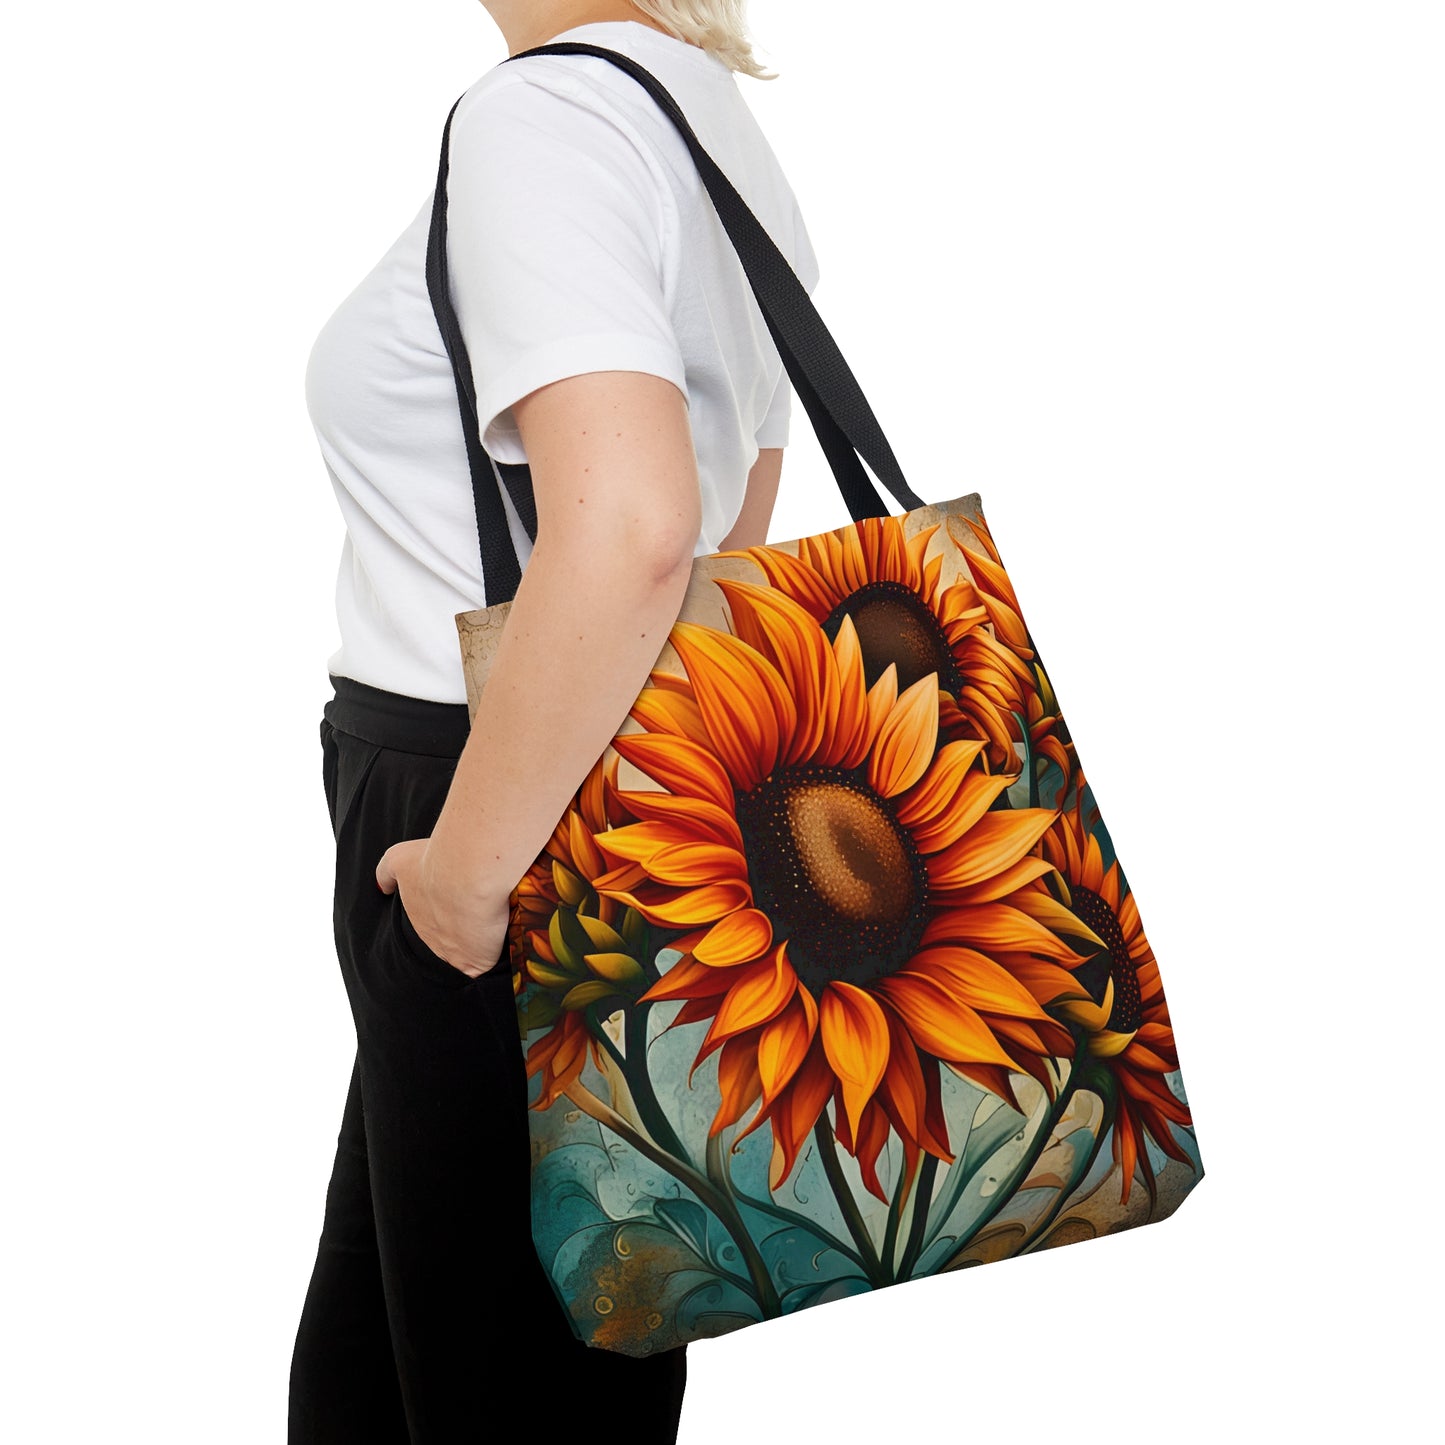 Sunflower Crop on Distressed Blue and Copper Background Printed on Tote Bag large